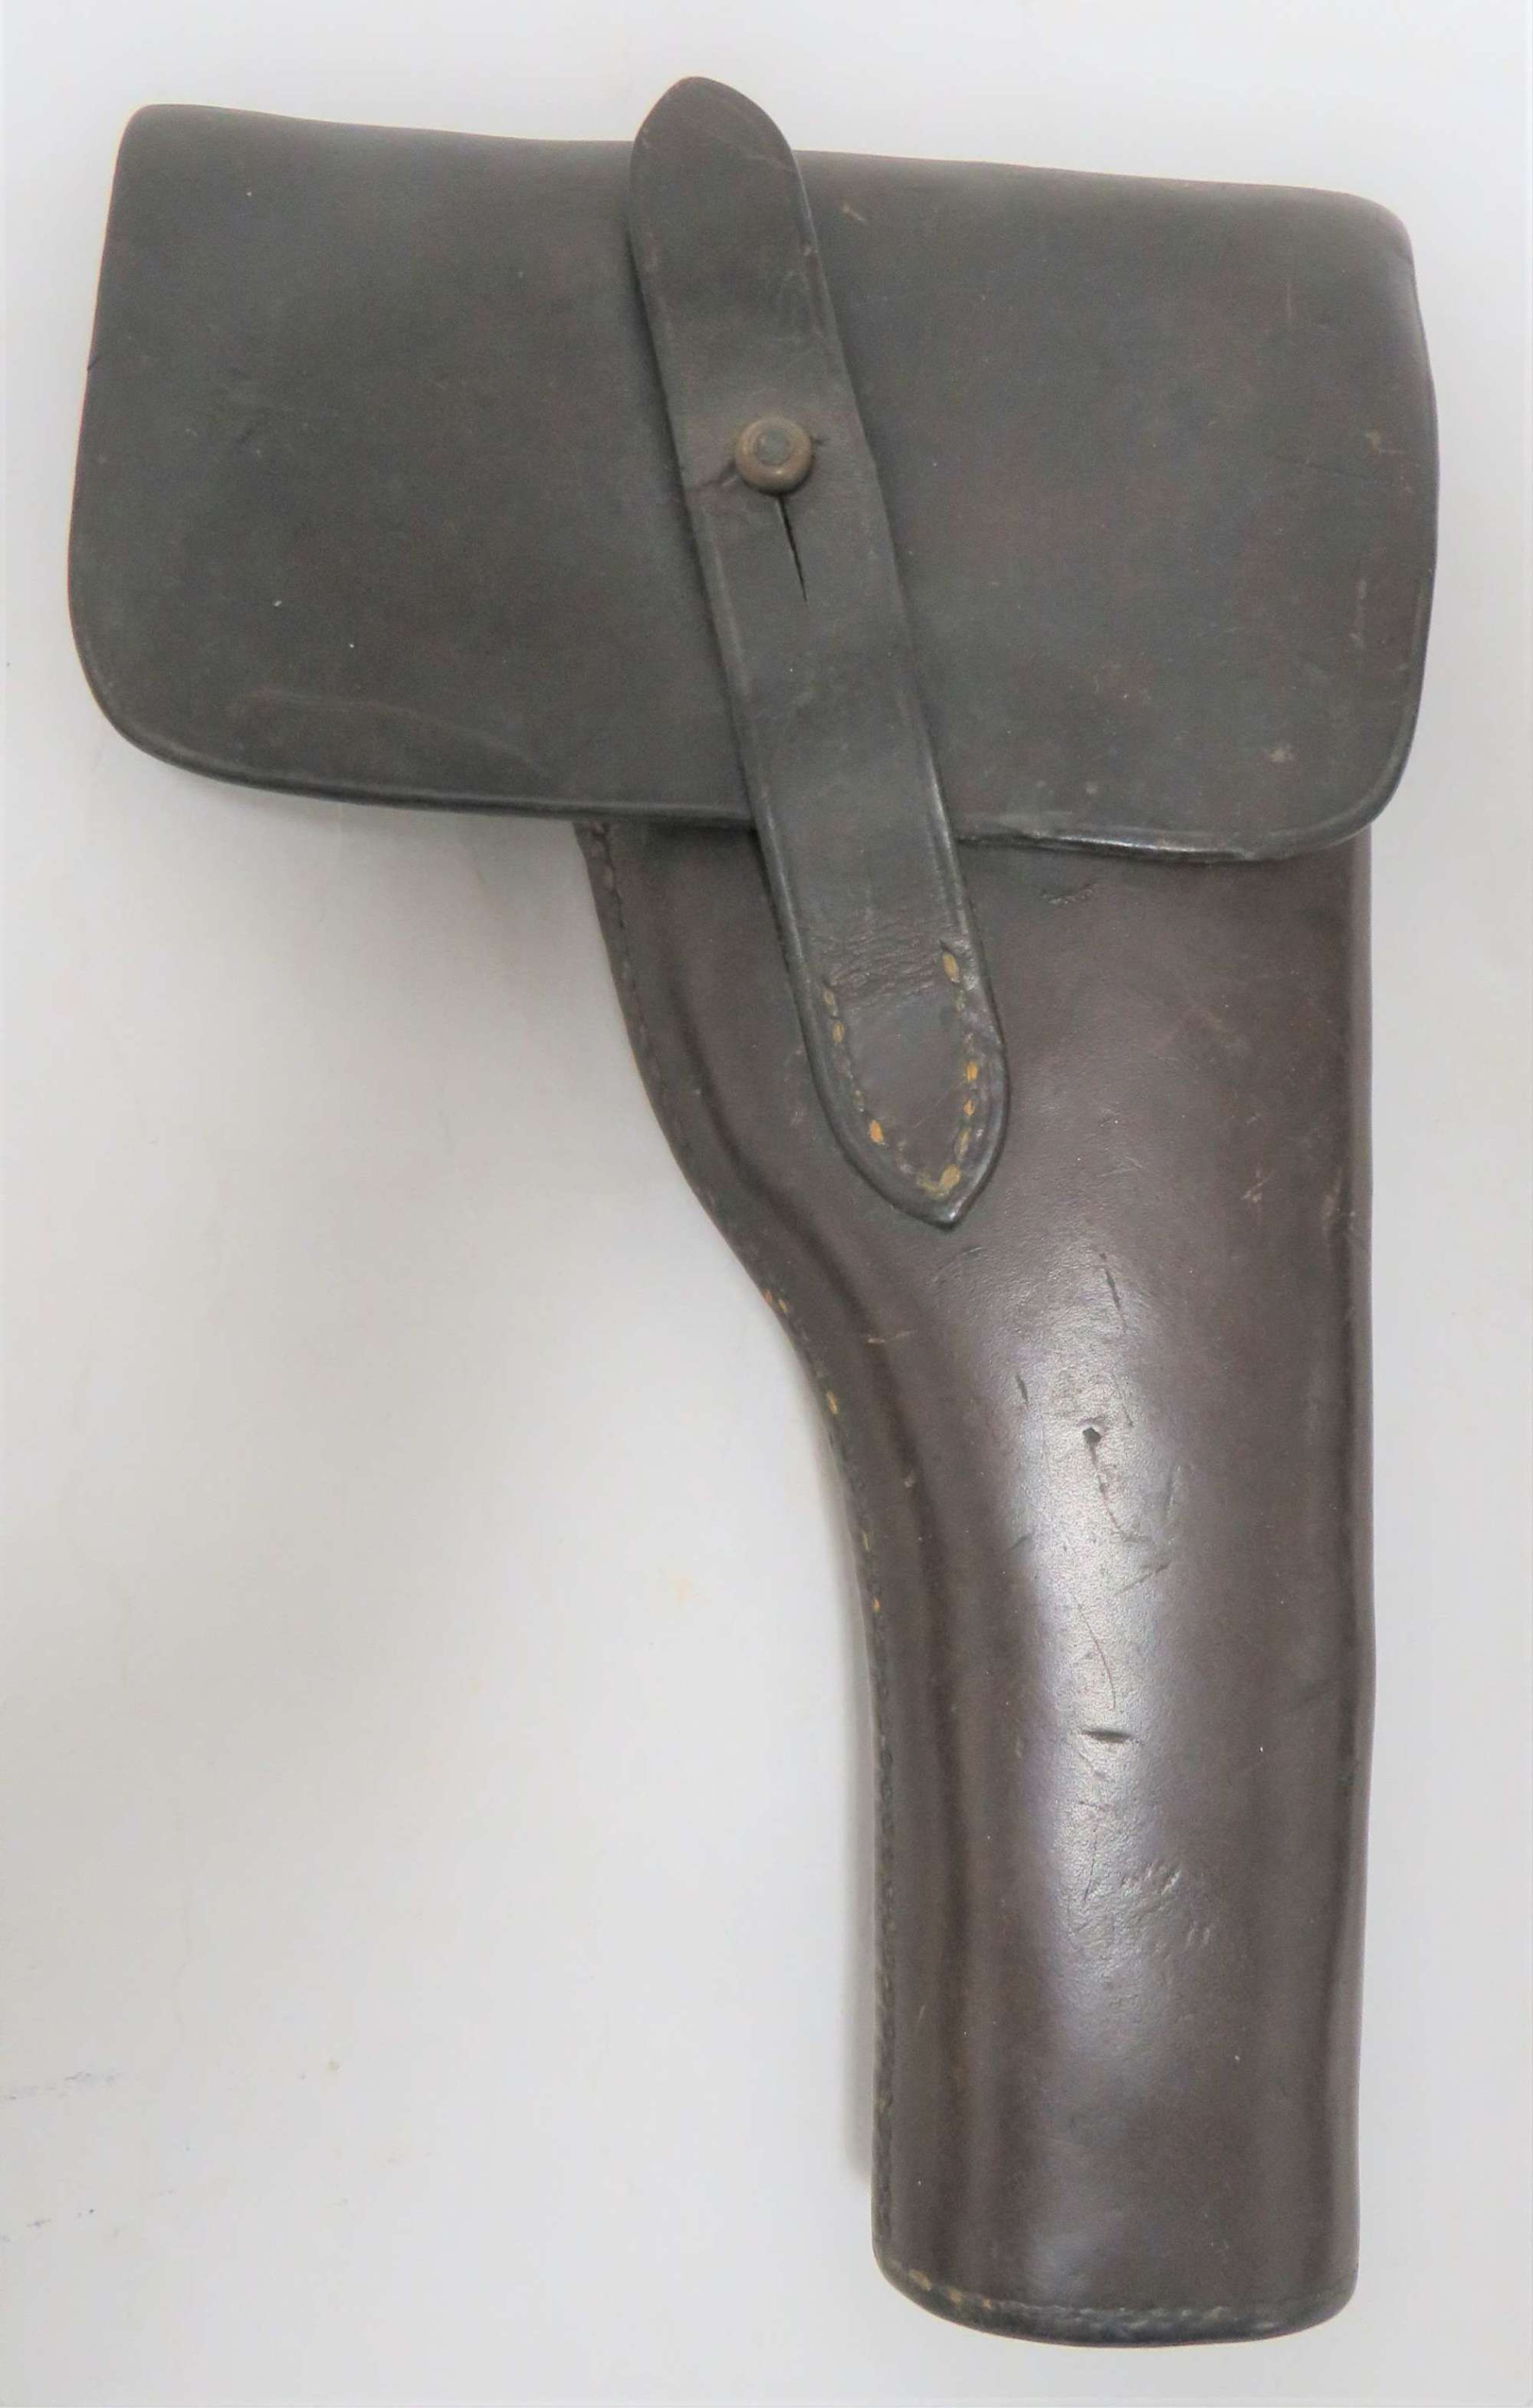 Extremely Rare WW1 British Issue Holster For the Colt 1911 Auto Pistol